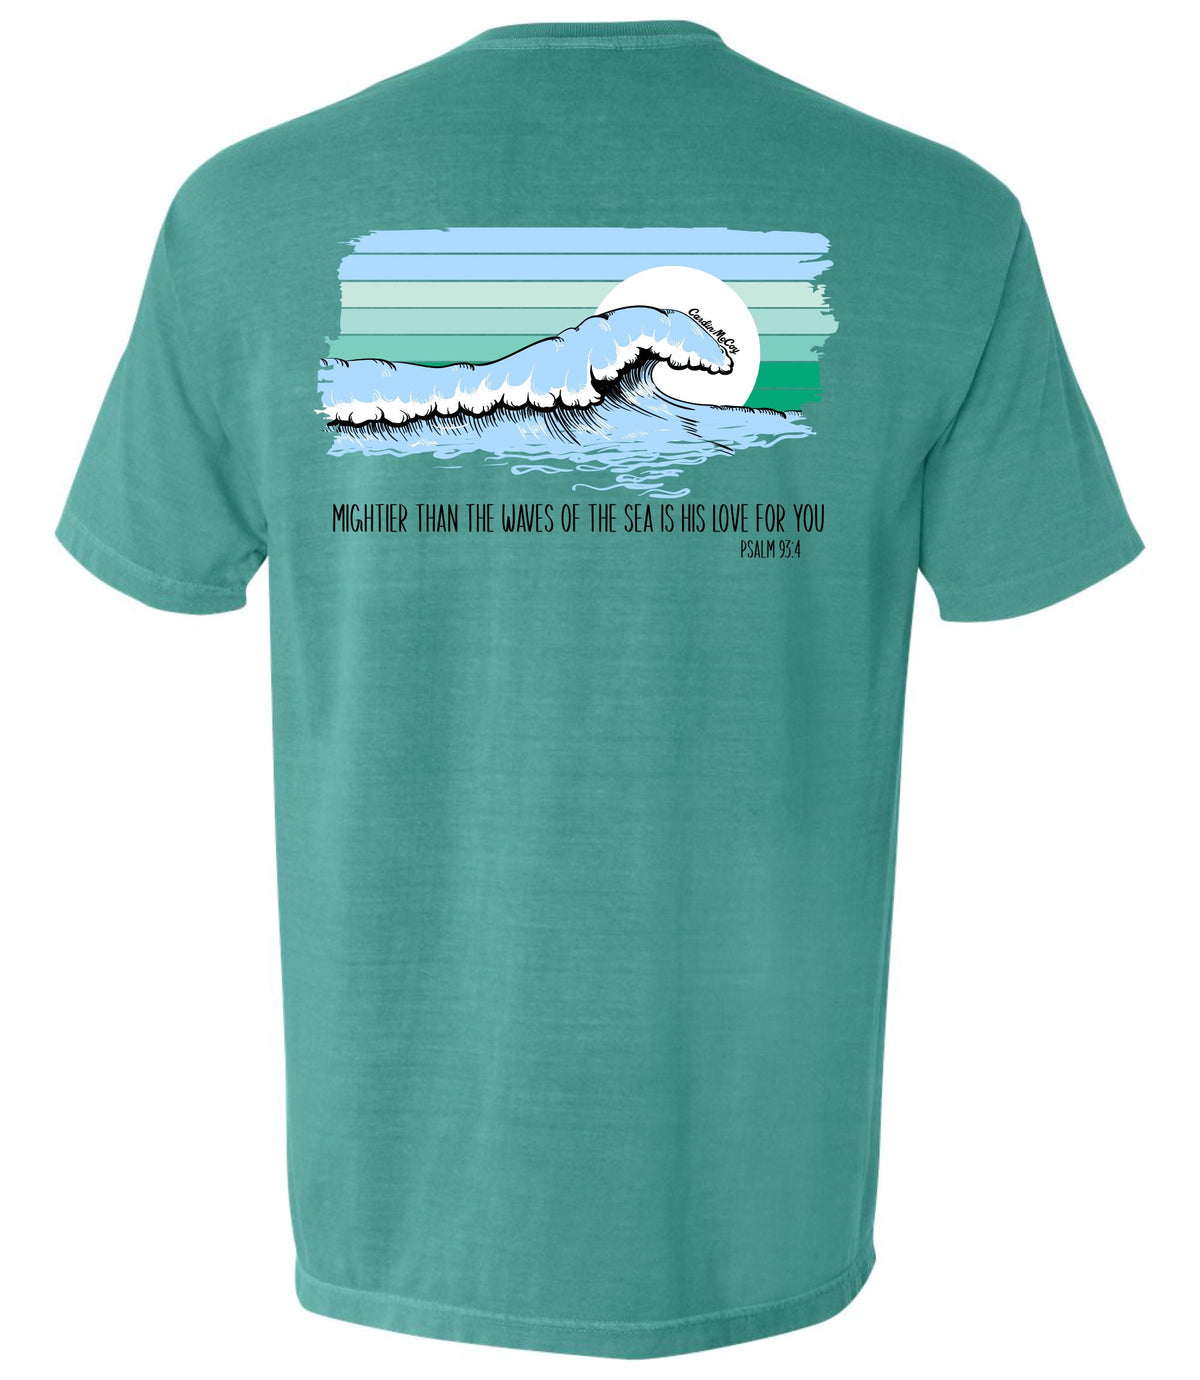 Adult Mightier Than the Waves Short Sleeve Pocket Tee Short Sleeve T-Shirt Comfort Colors Seafoam S Pocket